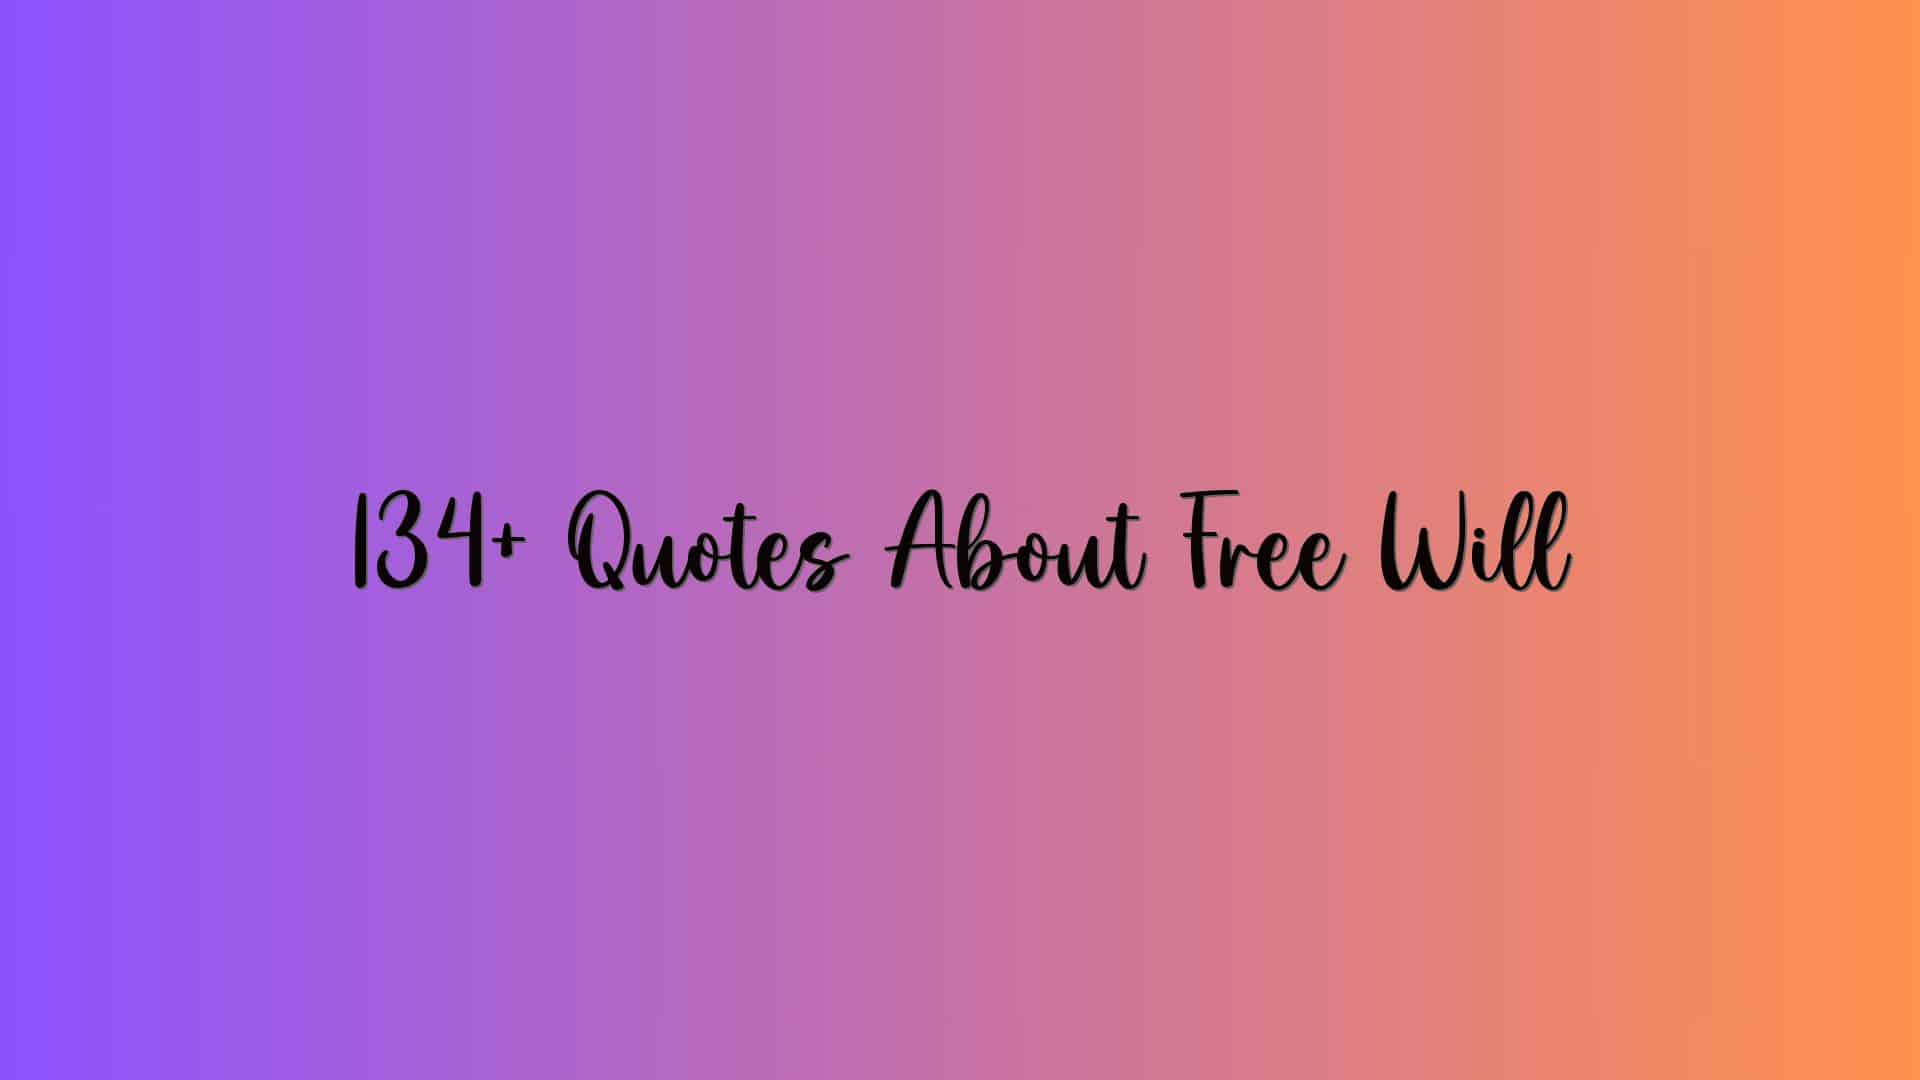 134+ Quotes About Free Will